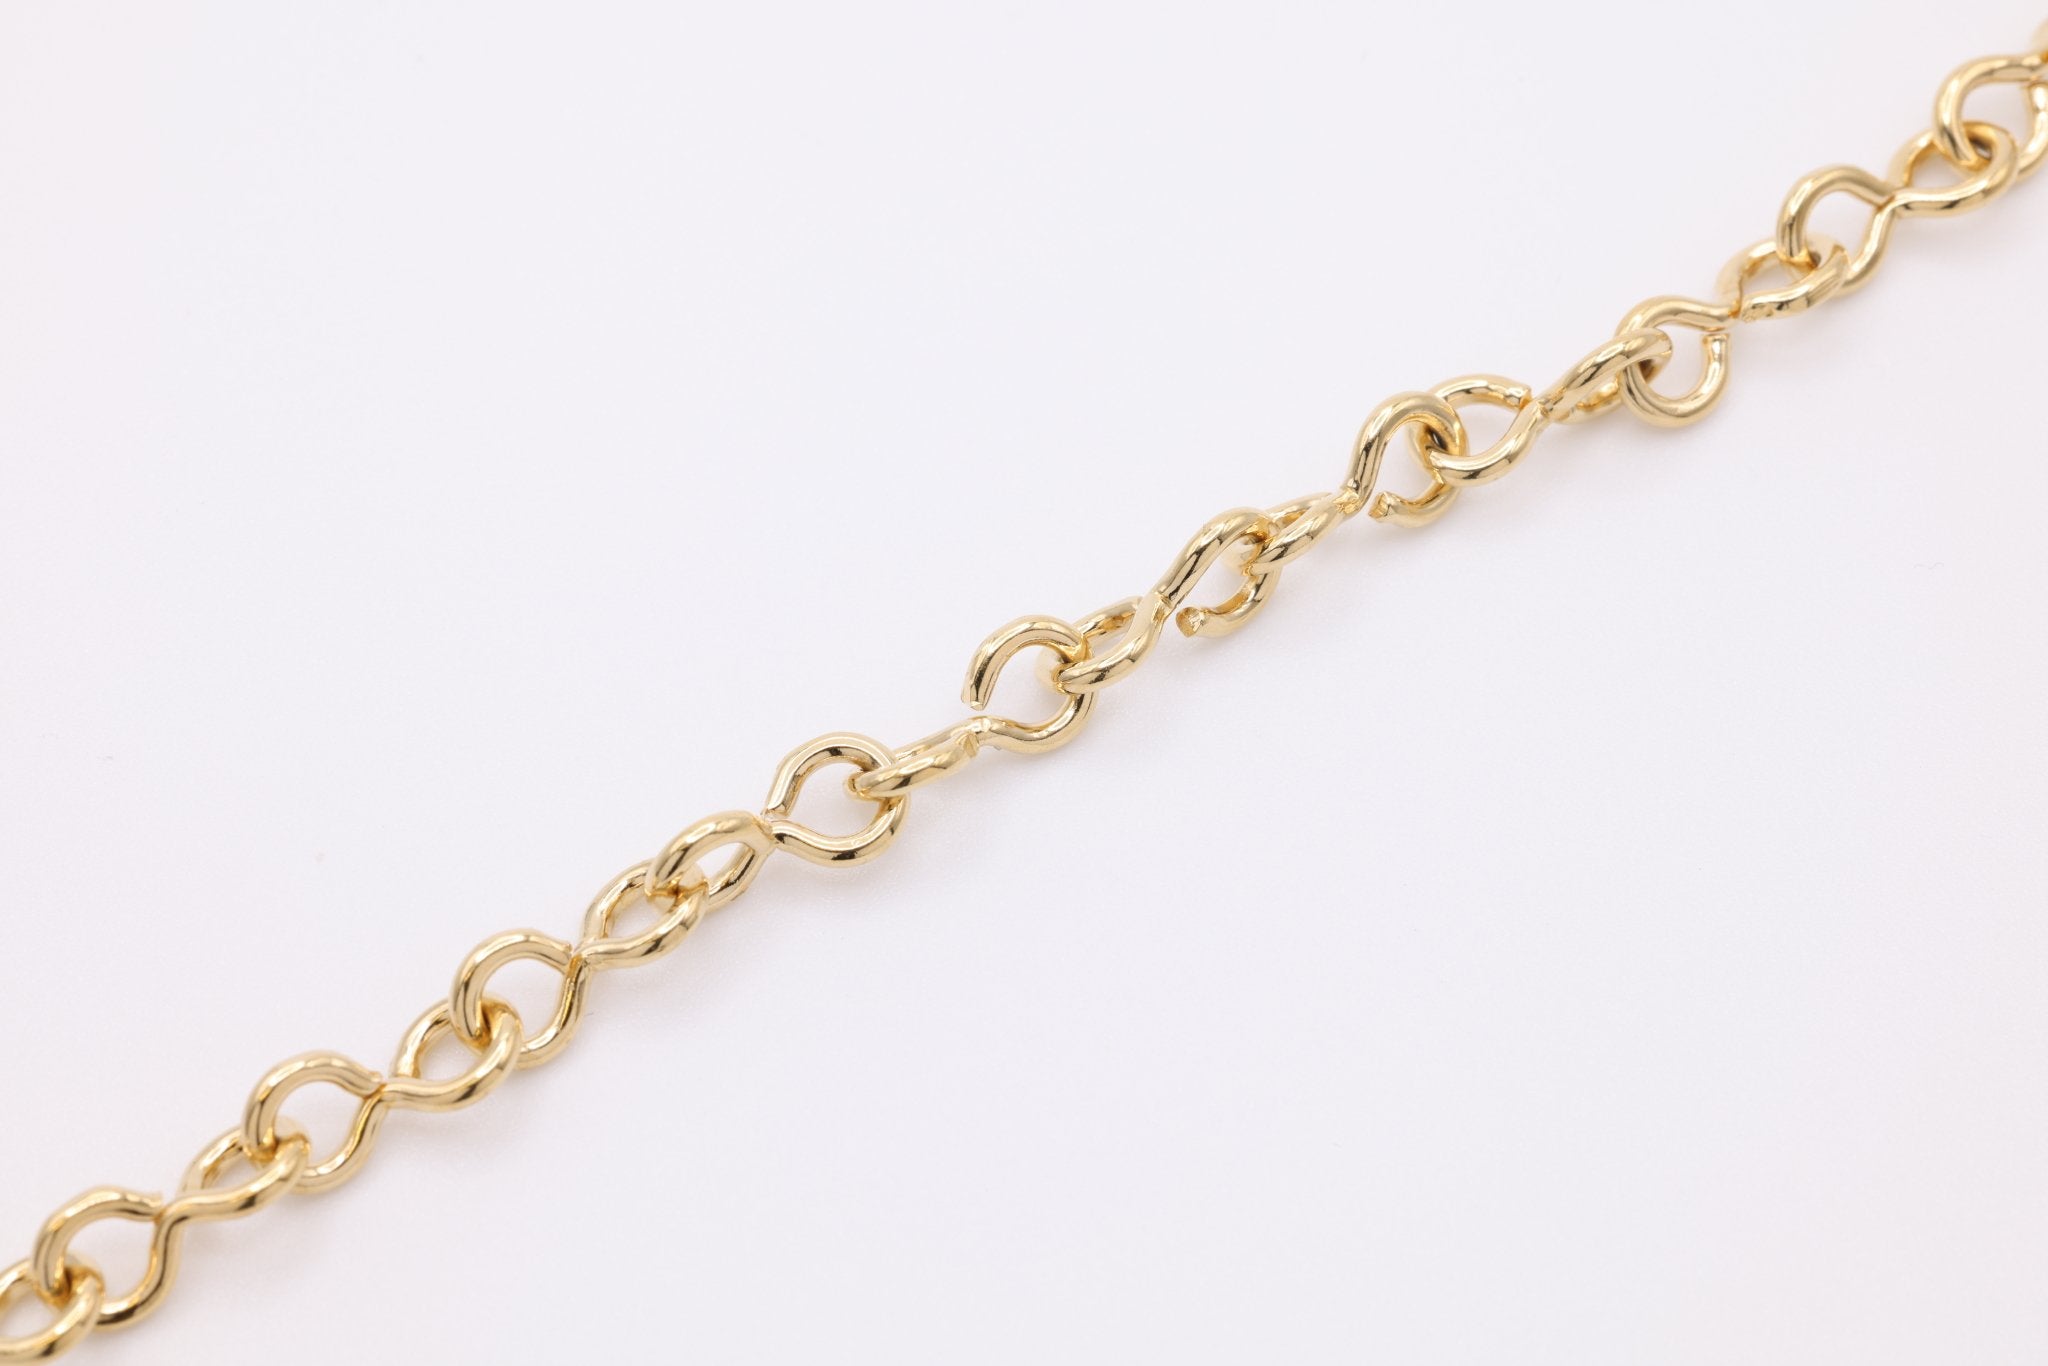 Olivia Infinity Chain, 14K Gold Overlay Plated, Wholesale Jewelry Chain - HarperCrown